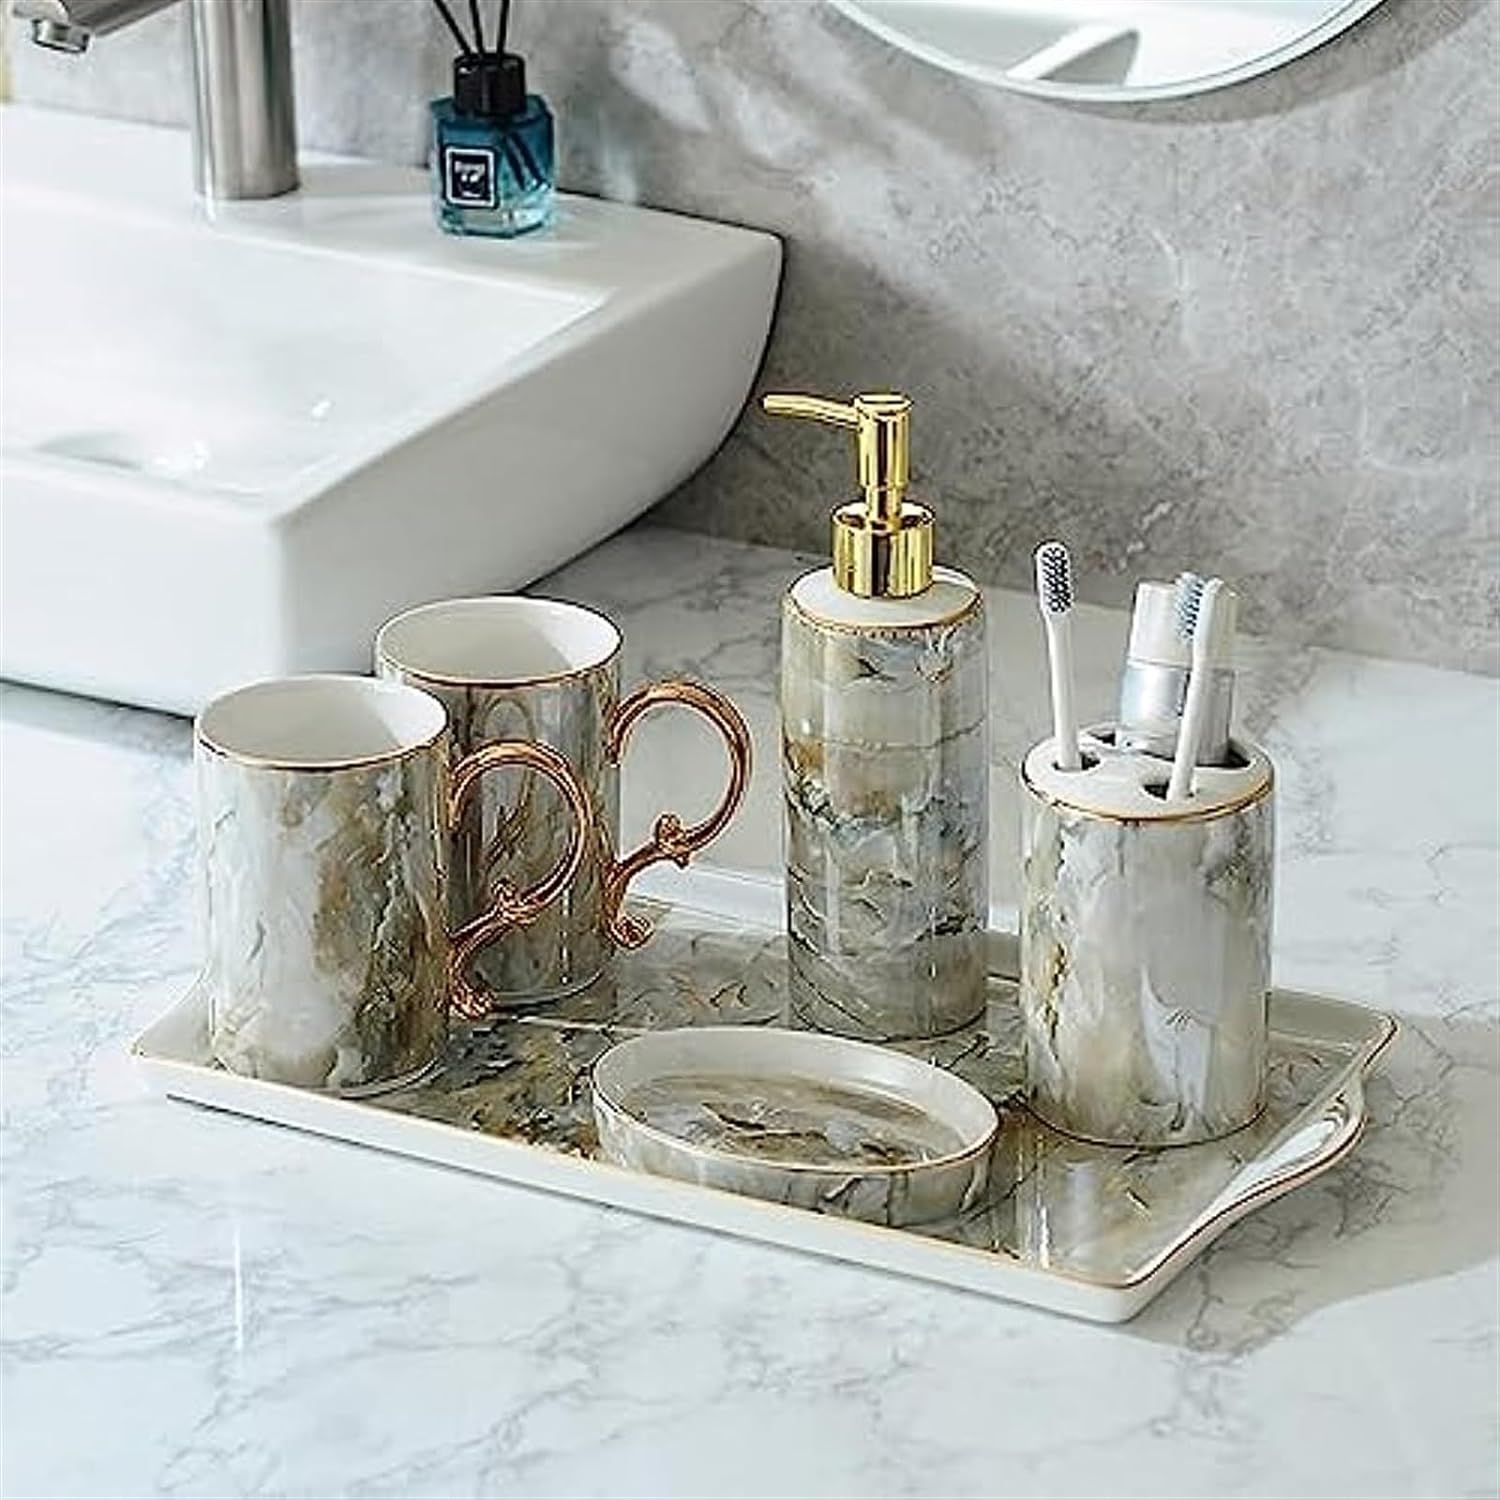 6 Pieces Handmade Ceramic Bathroom Accessory Set with Vanity Tray, Bathroom Countertop Accessory Set, Include Soap Dispenser, Toothbrush Holder, 2 Tumbler